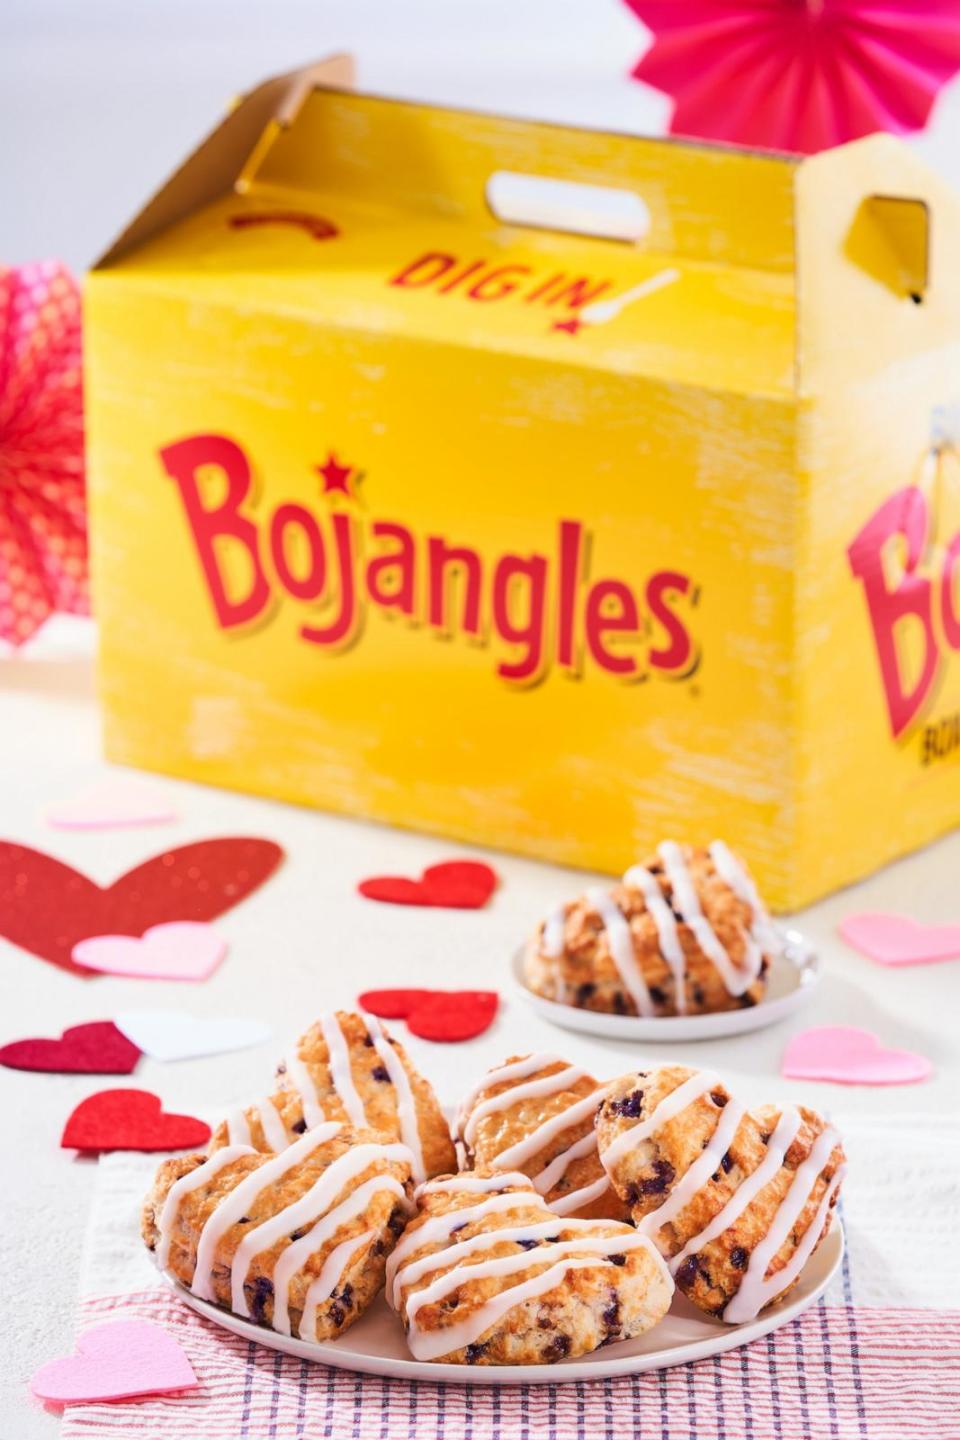 PHOTO: Heart-shaped Bo Berry biscuits from Bojangles for Valentine's Day. (Bojangles)